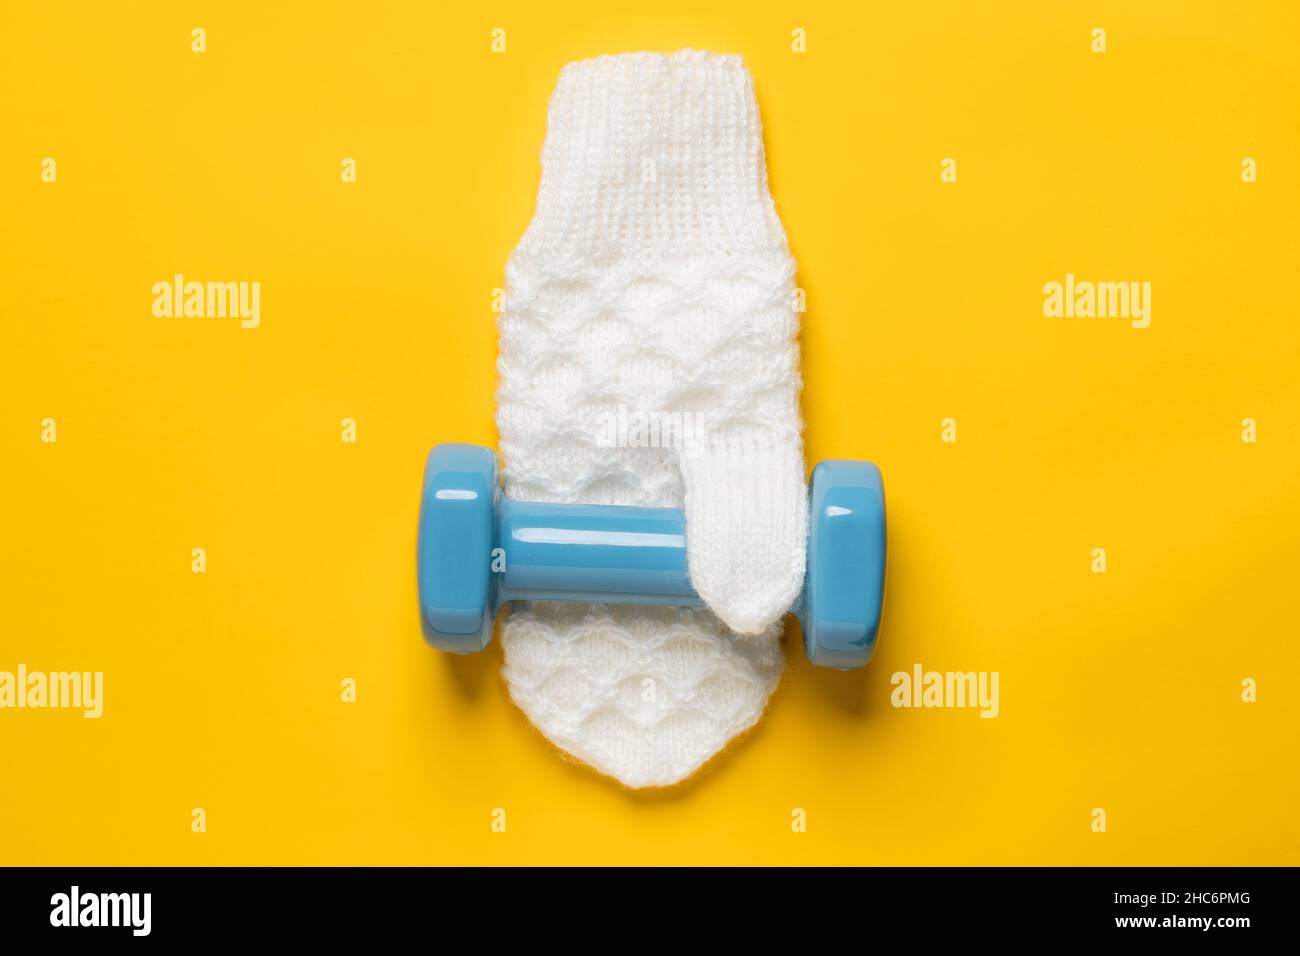 Dumbbell on a white, knitted mitten, on a yellow background. Healthy and active lifestyle concept. Top view.  Stock Photo